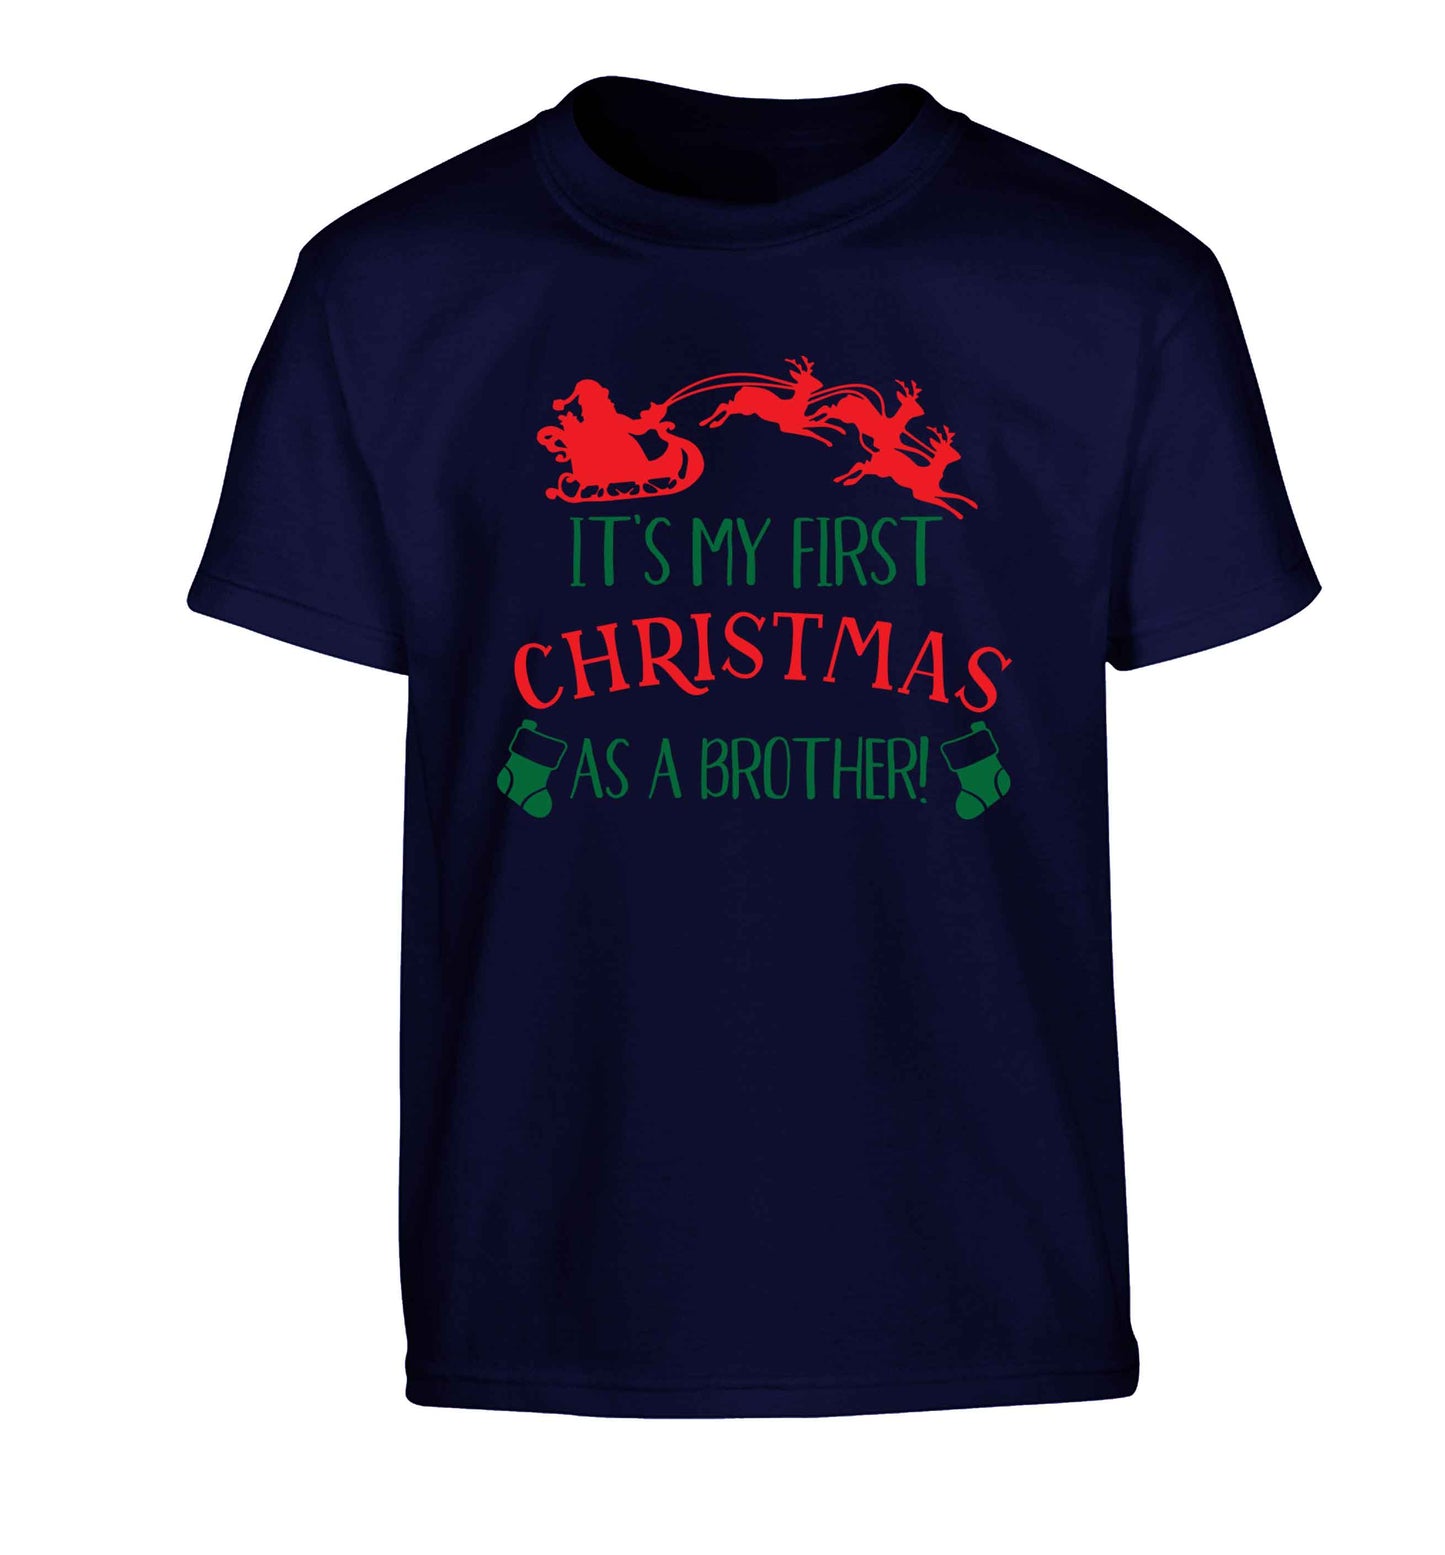 It's my first Christmas as a brother! Children's navy Tshirt 12-13 Years